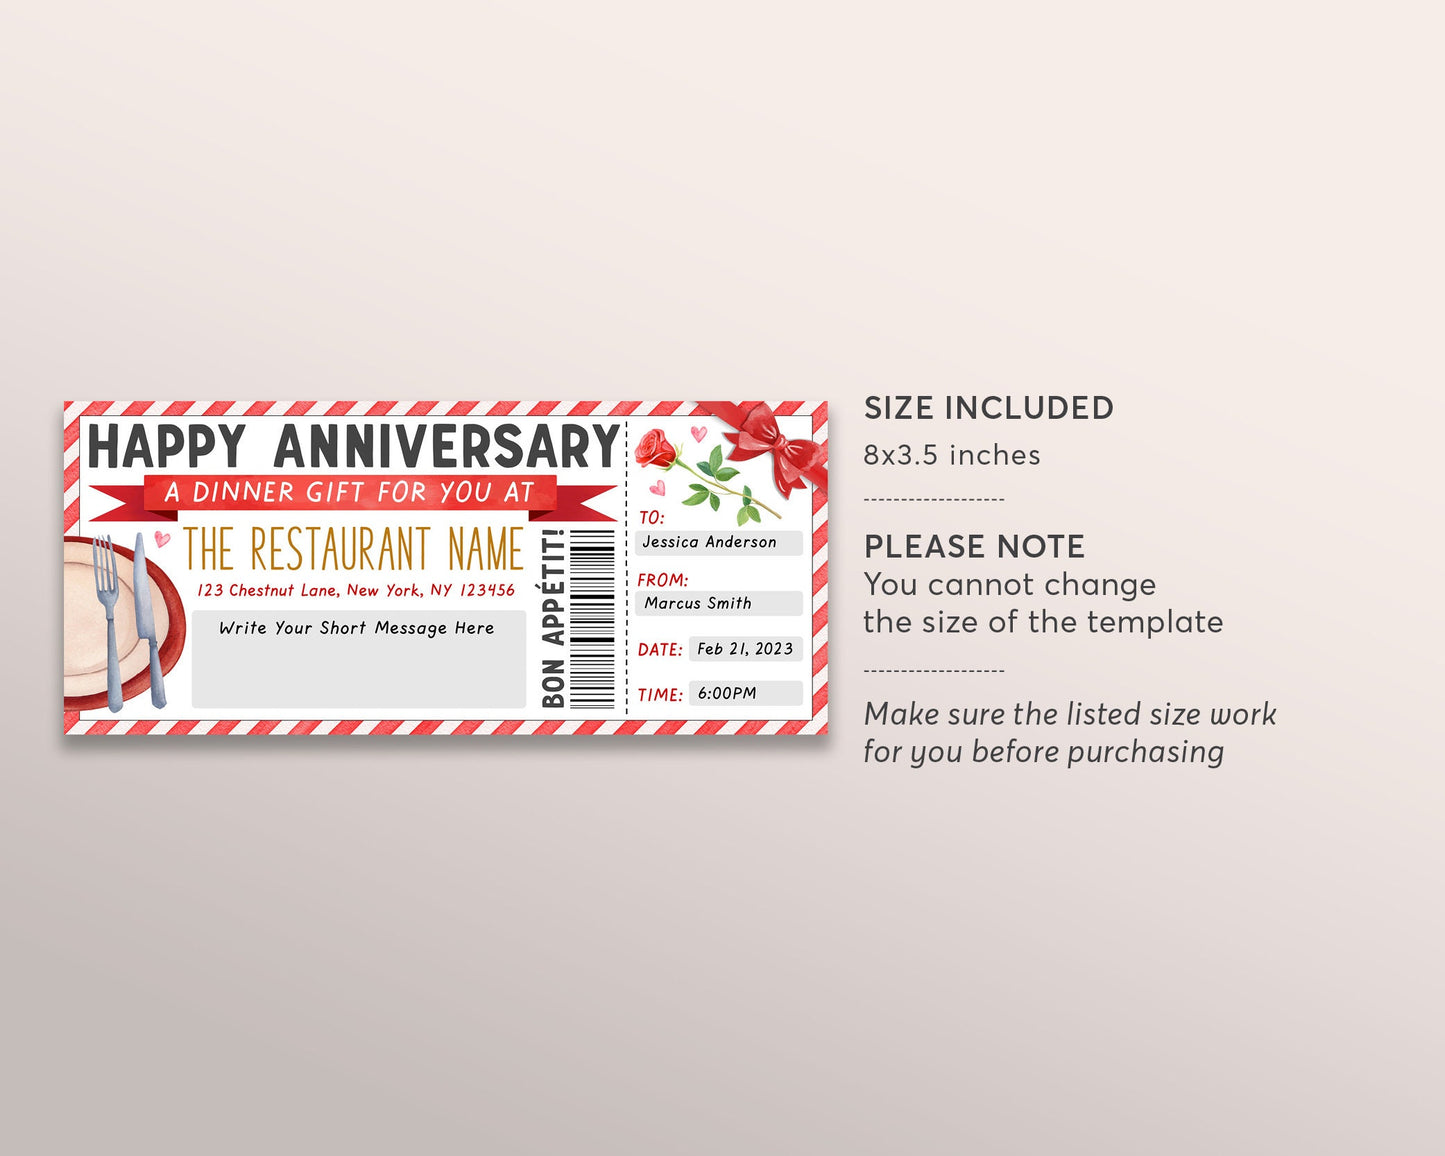 Restaurant Gift Voucher Editable Template, Wedding Anniversary Surprise Dinner Date Gift Certificate Printable, Dining Night Out Coupon